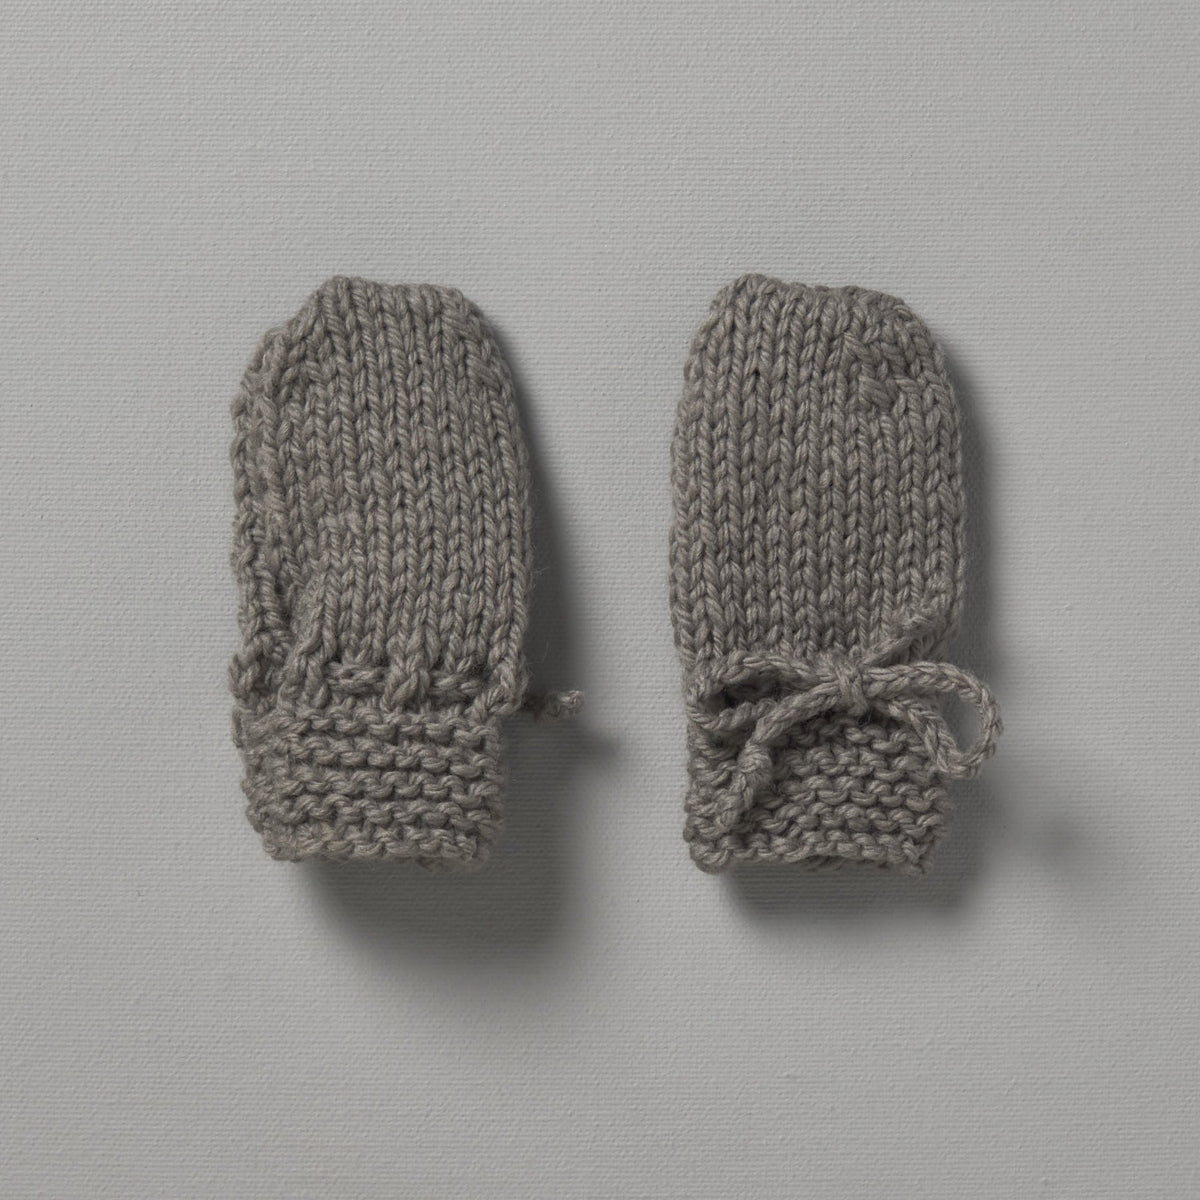 A pair of grey Weebits hand knitted mittens on a white surface.